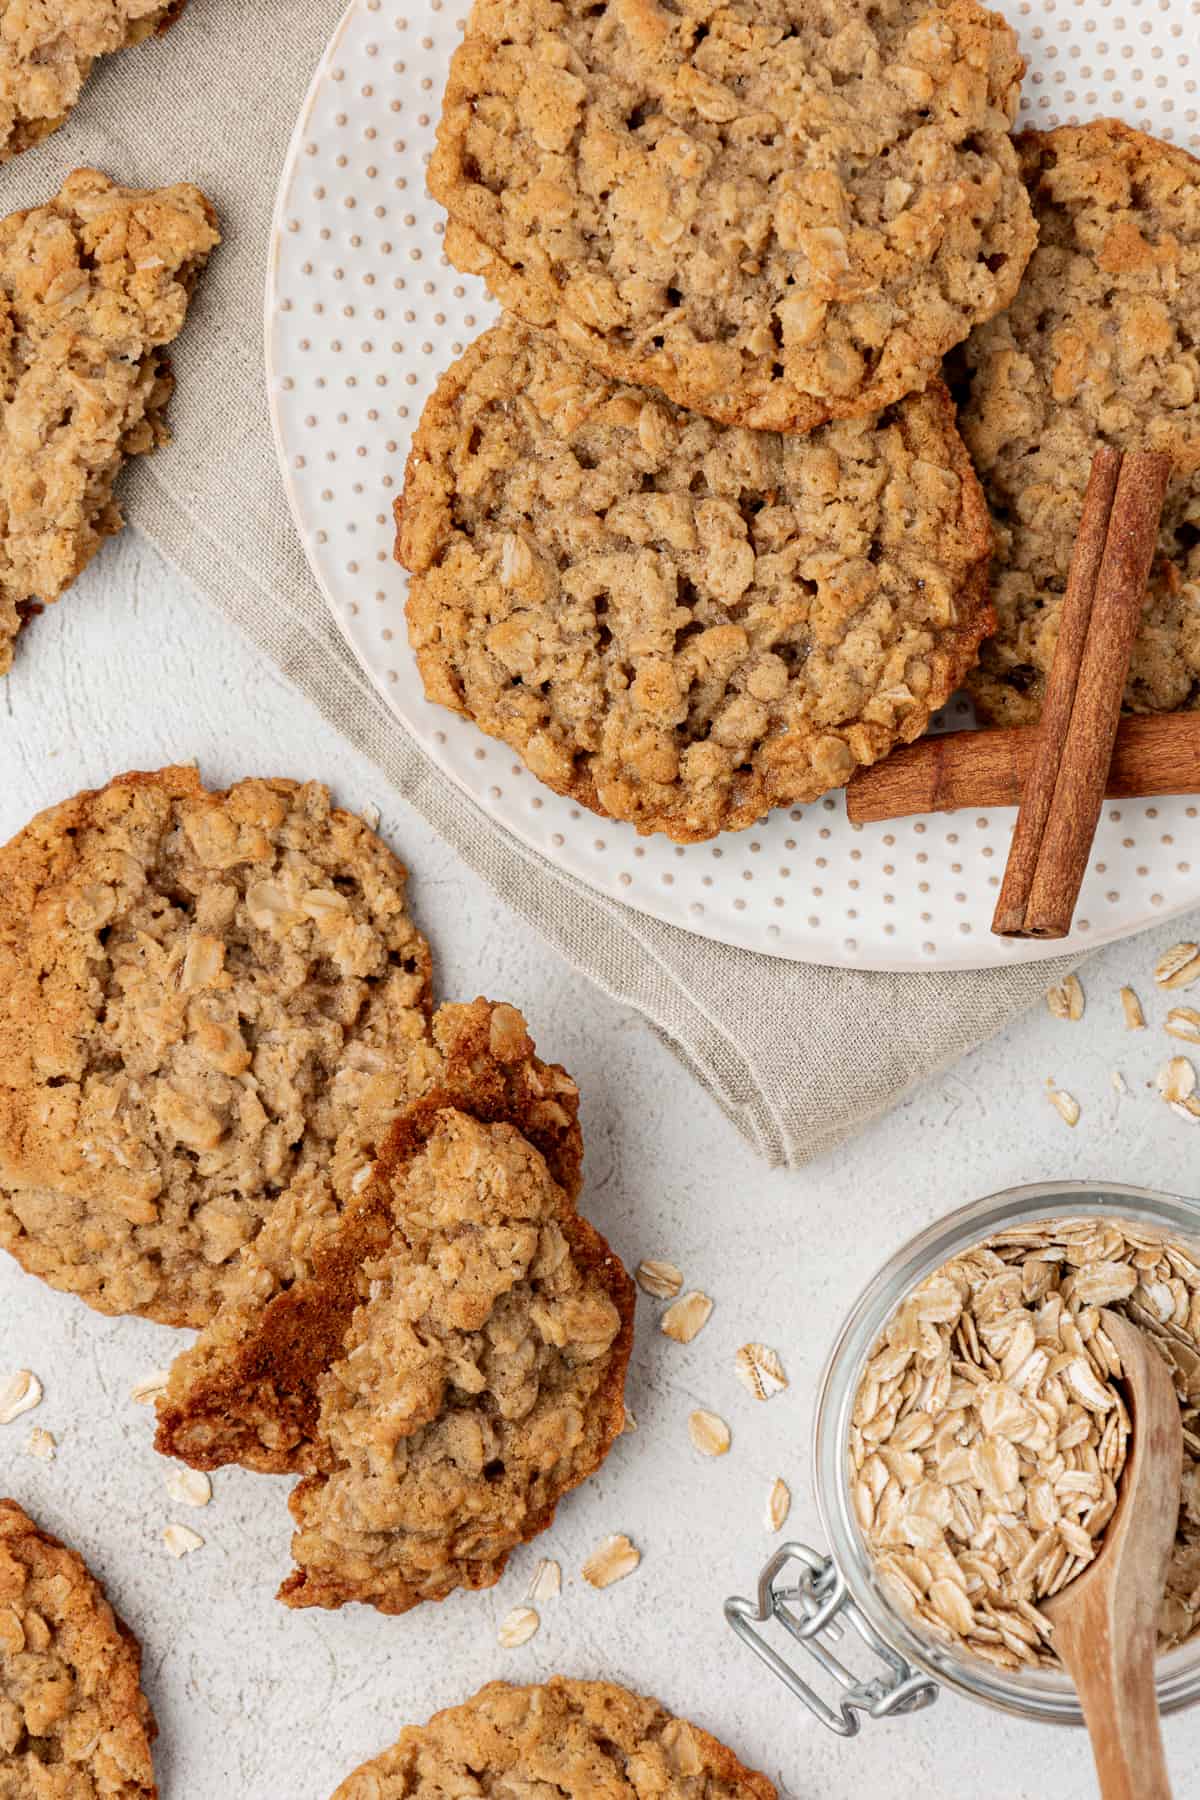 a plate of oatmeal cookies on top of a tan kitchen towel with more cookies around it, a jar of oats with a wooden spoon and oats sprinkled around